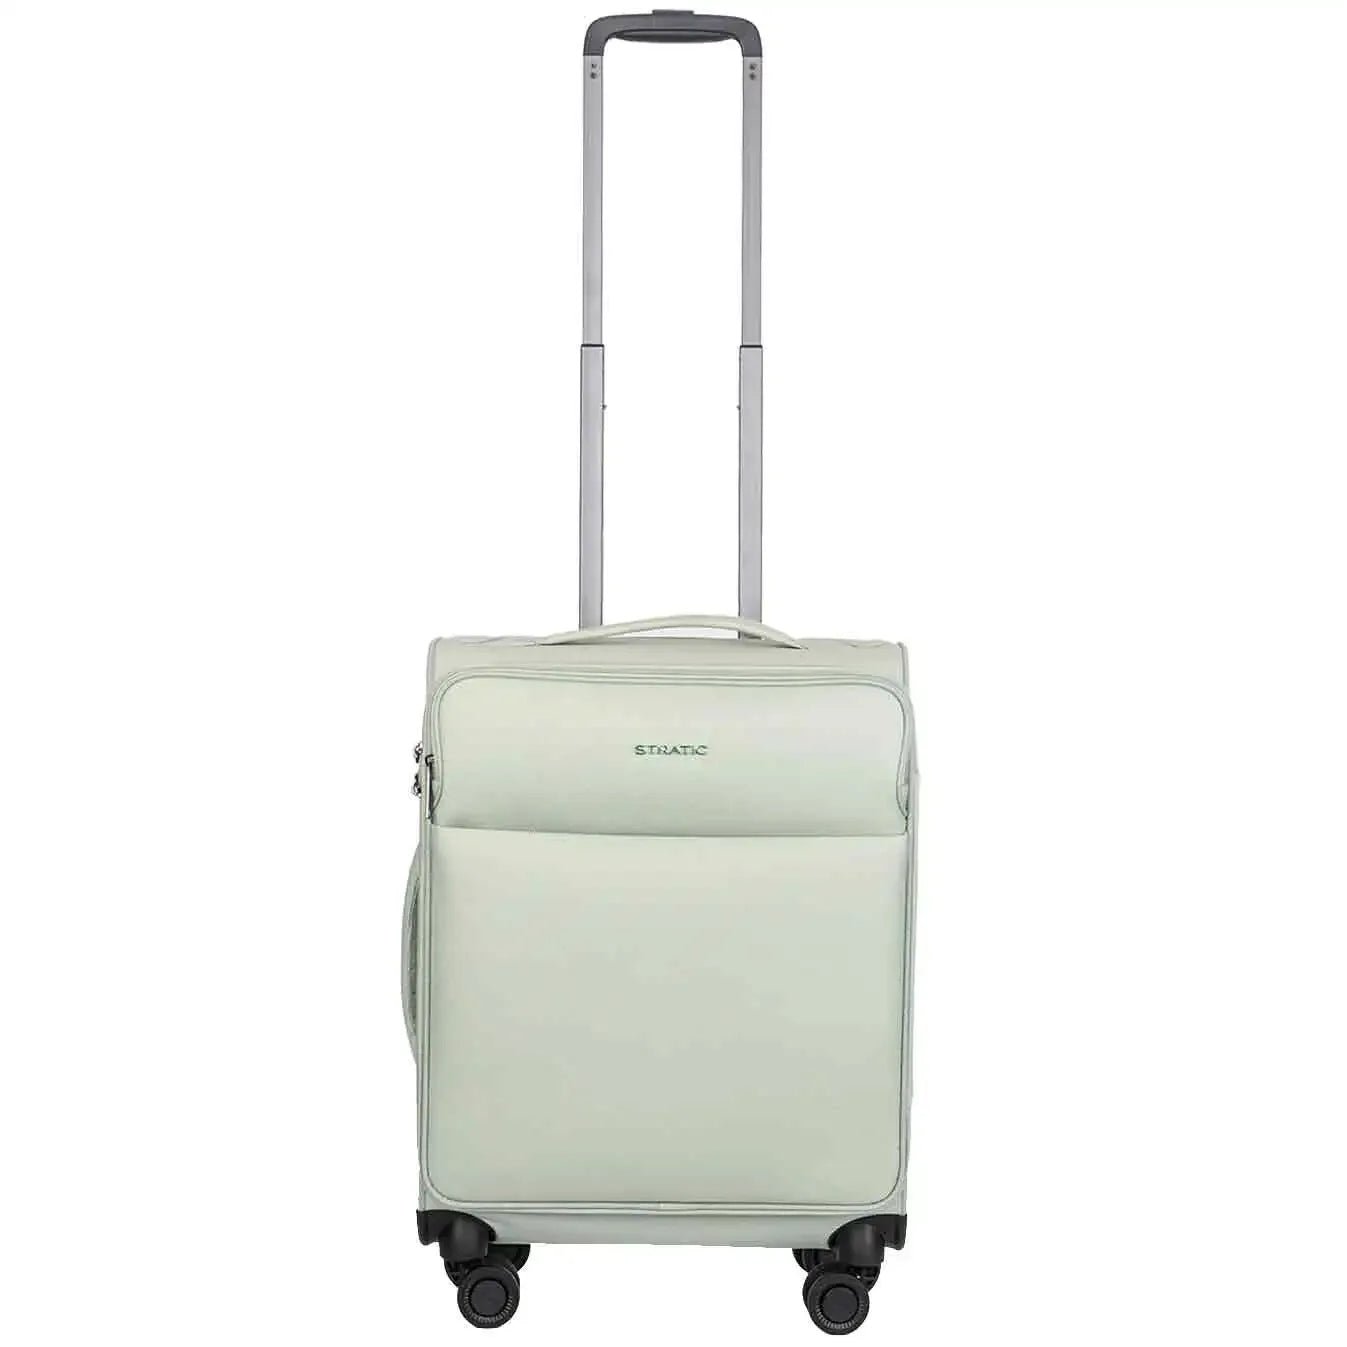 Stratic Light + trolley cabine 4 roues 55 cm - Menthe